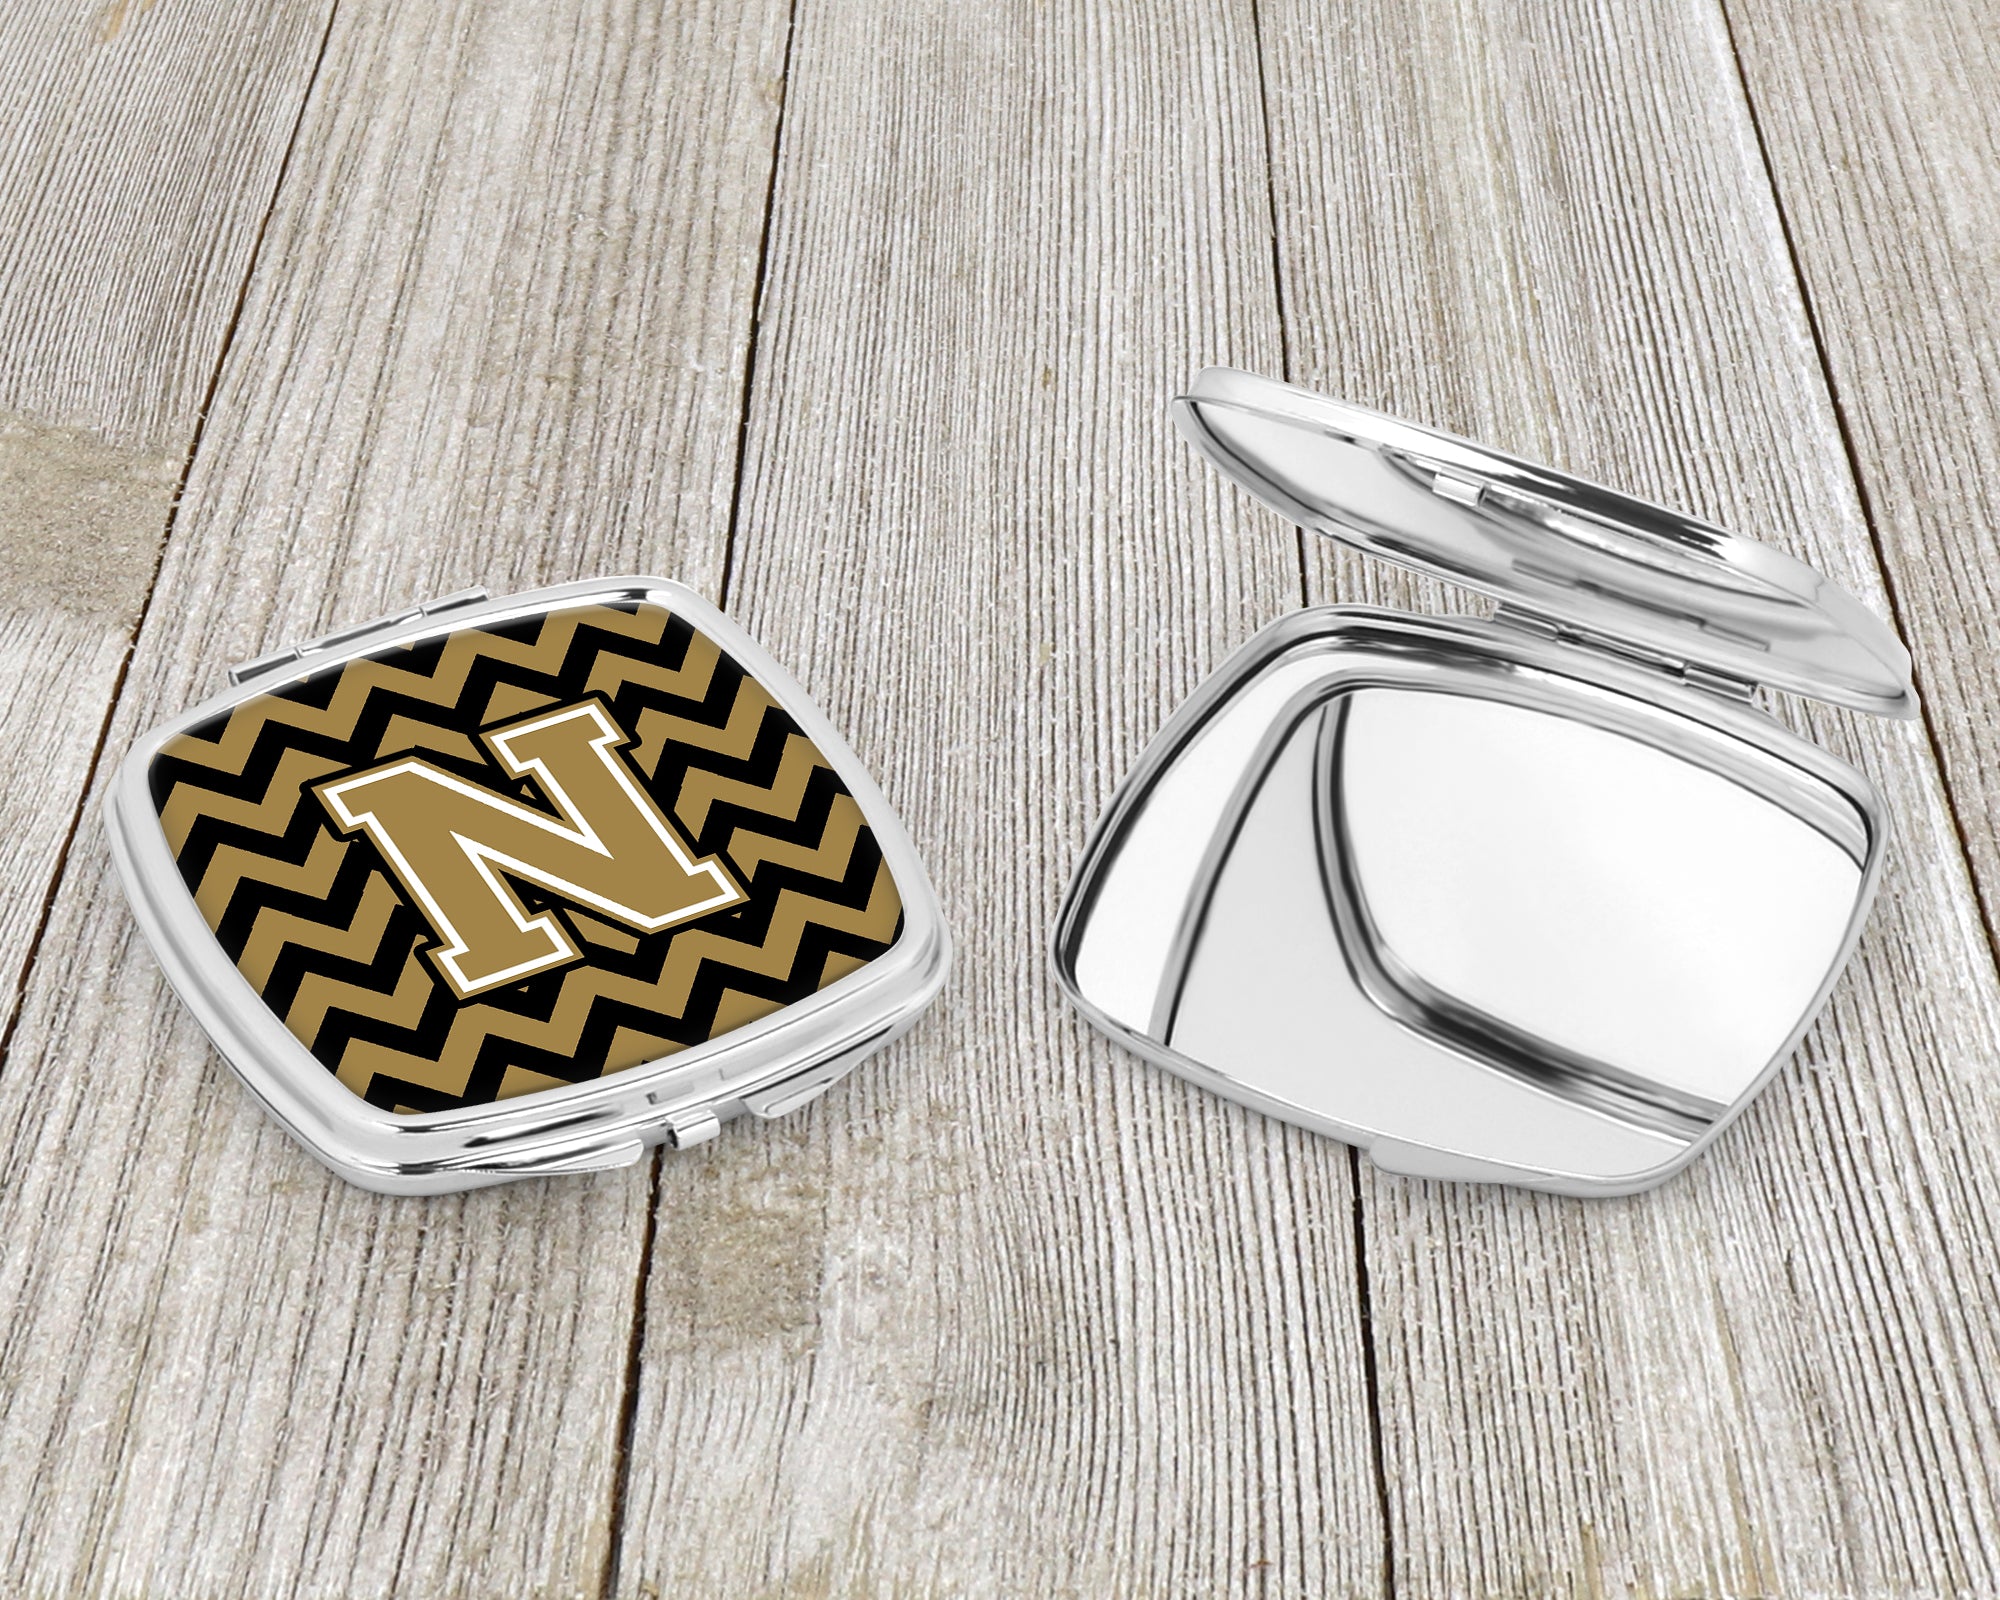 Letter N Chevron Black and Gold  Compact Mirror CJ1050-NSCM  the-store.com.